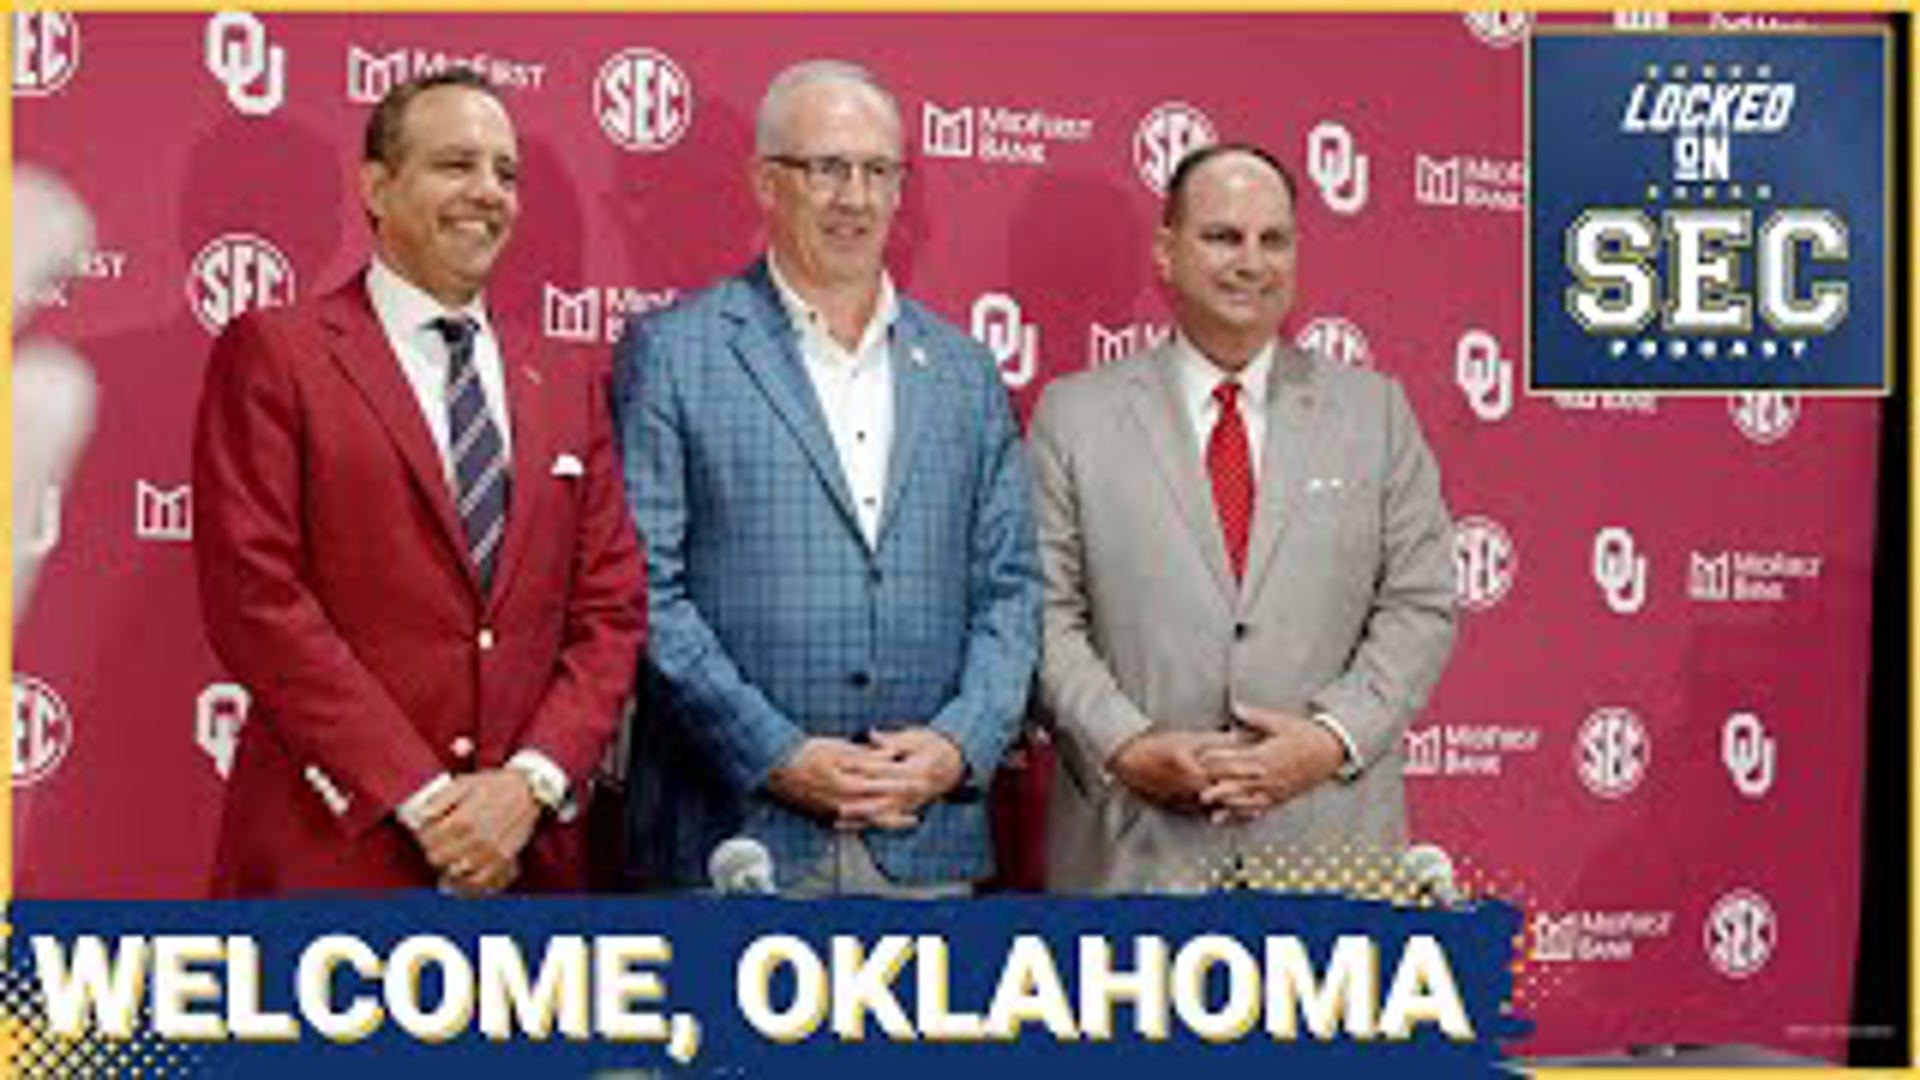 On today's show, we officially welcome Oklahoma to the SEC as the Sooners had a huge on campus celebration on Monday as the former Big12 team made the SEC move.